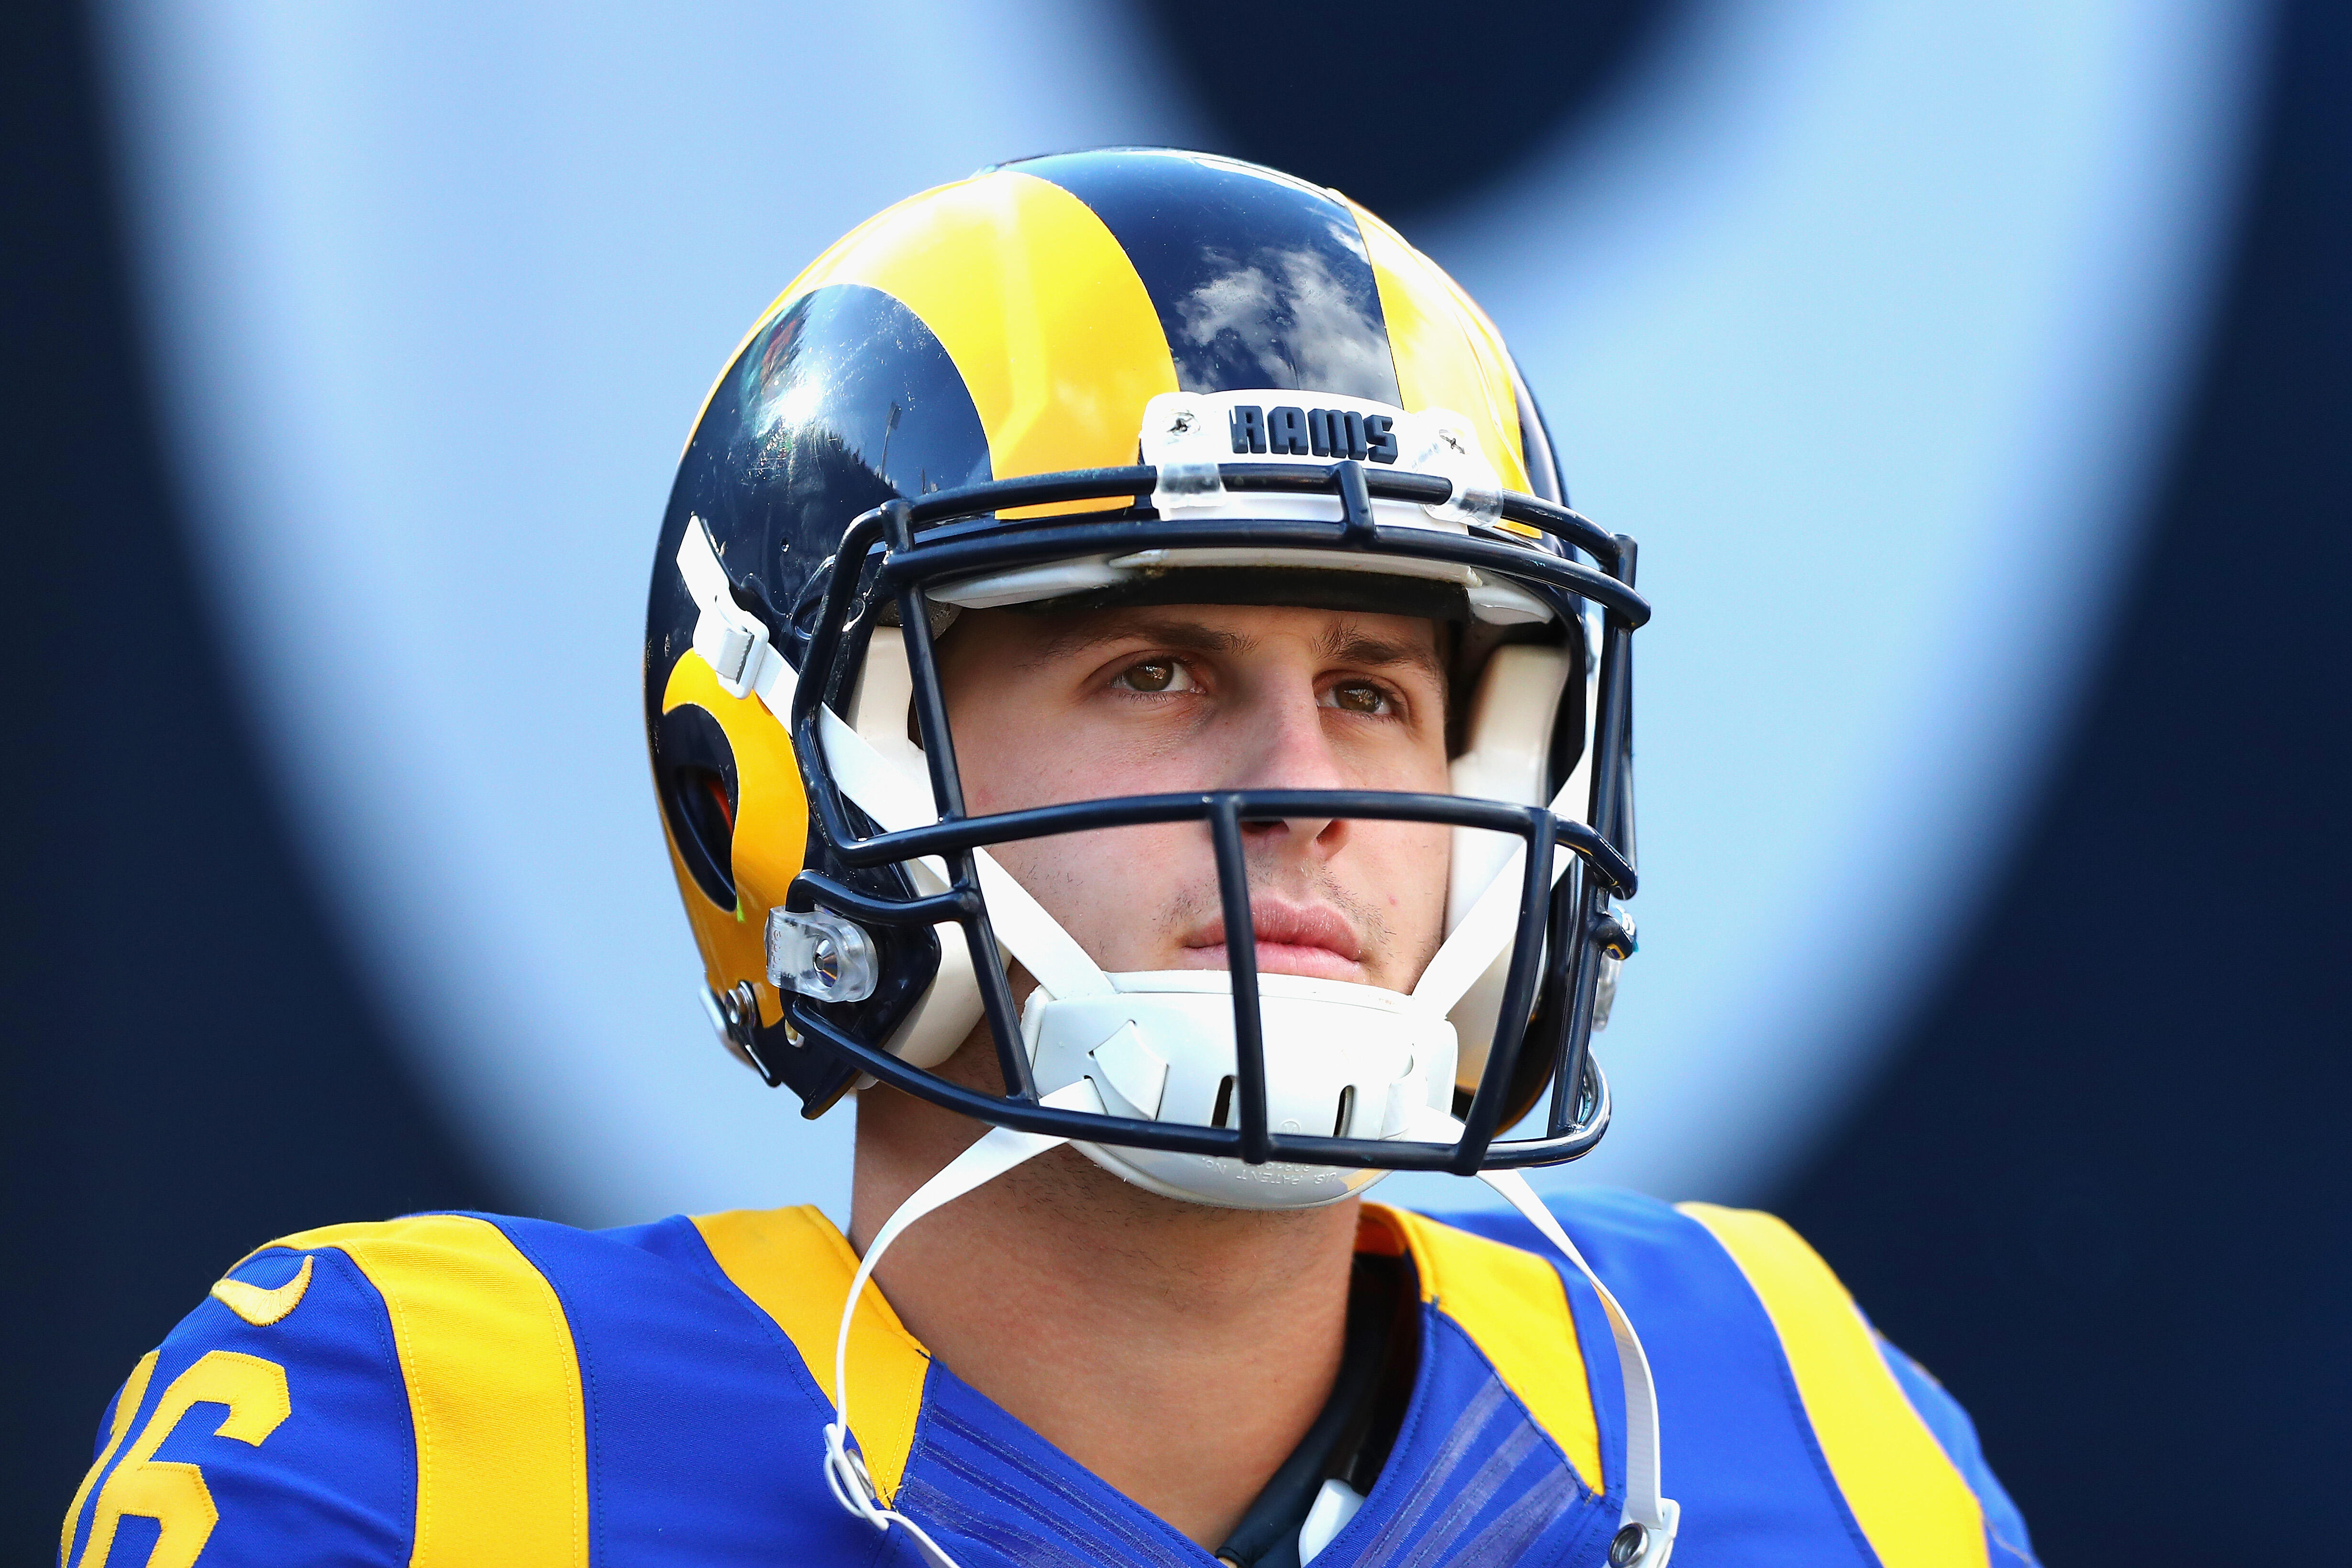 LOS ANGELES, CA - DECEMBER 24:  Jared Goff #16 of the Los Angeles Rams looks on before the game against the San Francisco 49ers at Los Angeles Memorial Coliseum on December 24, 2016 in Los Angeles, California.  (Photo by Tim Bradbury/Getty Images)